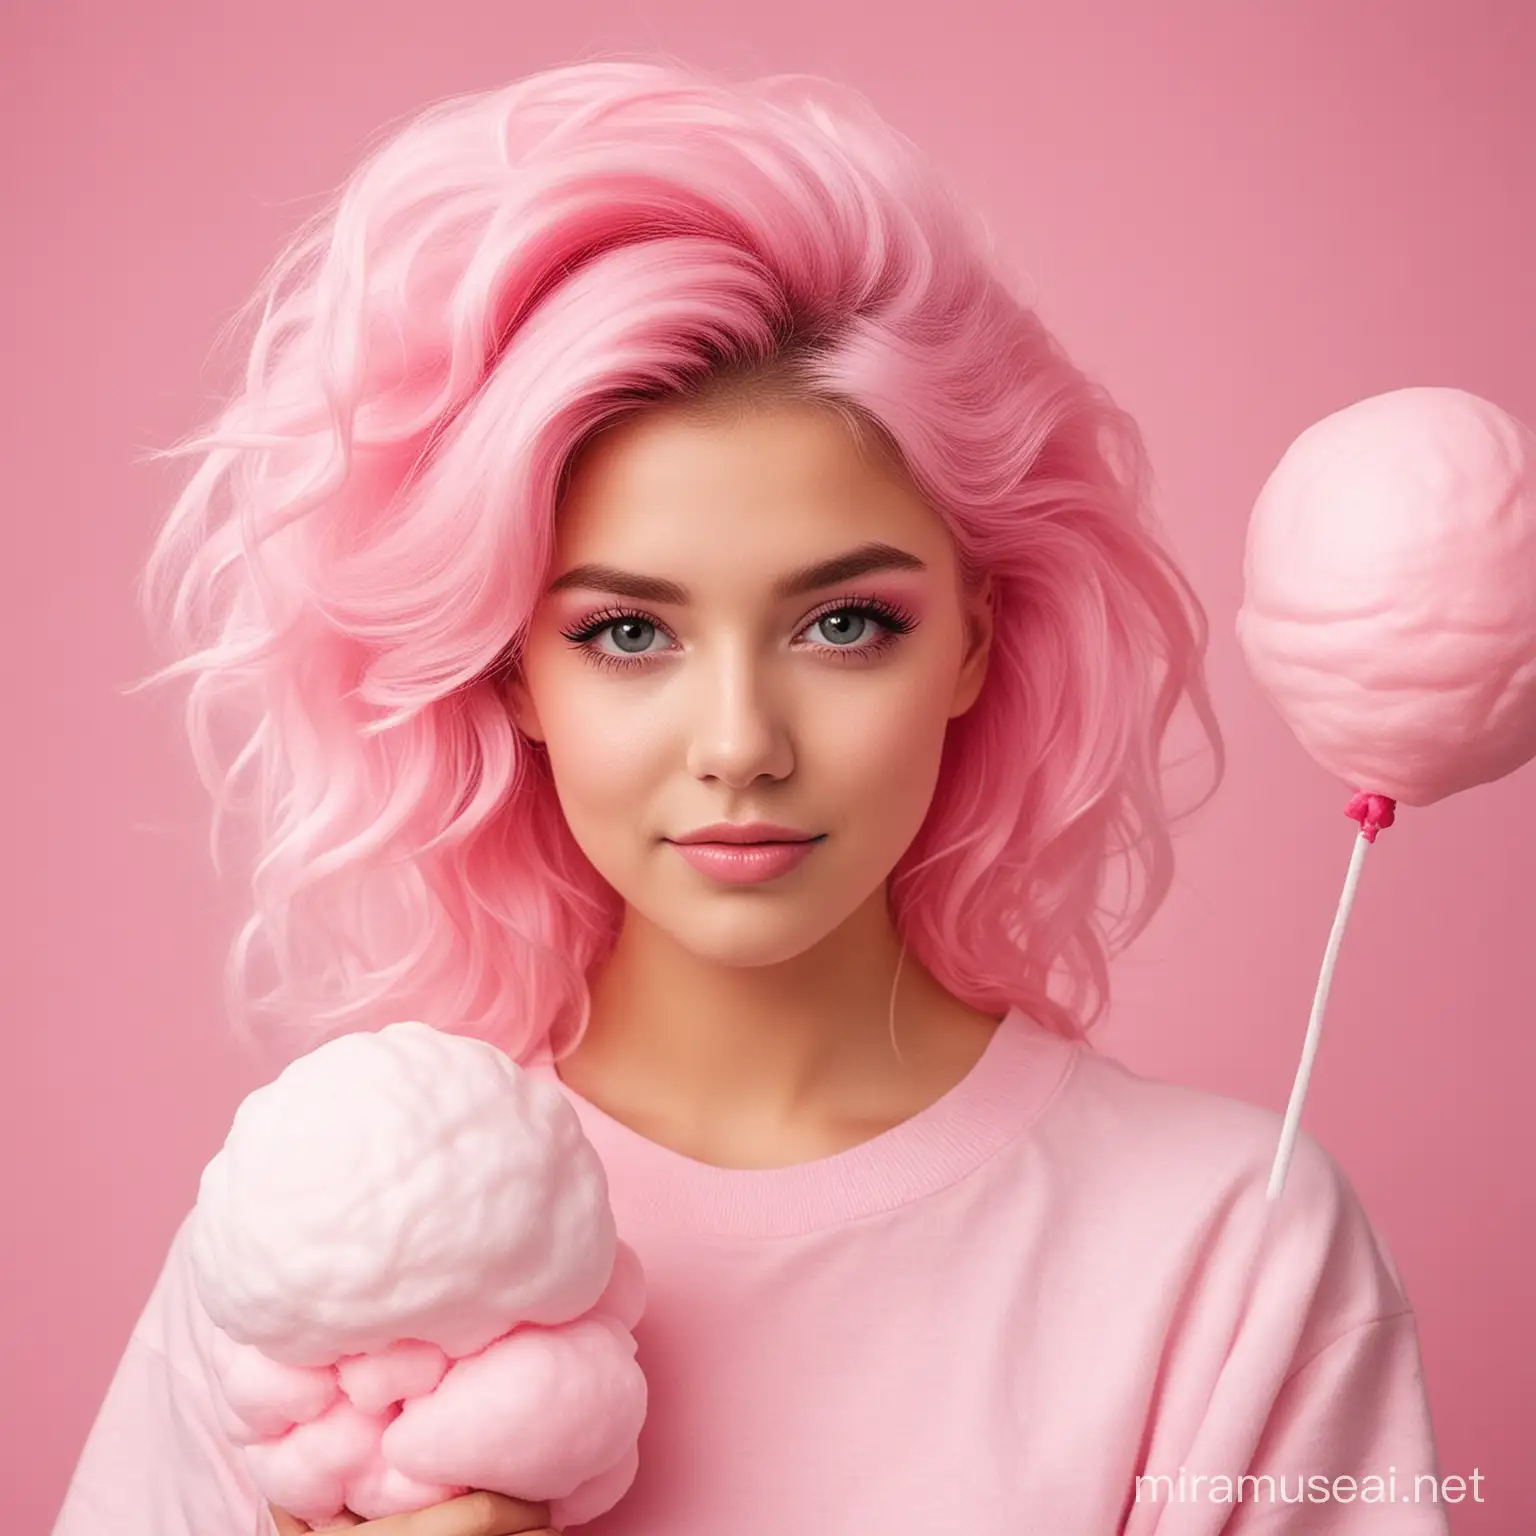 Dreamy Girl with Cotton Candy Fantasy